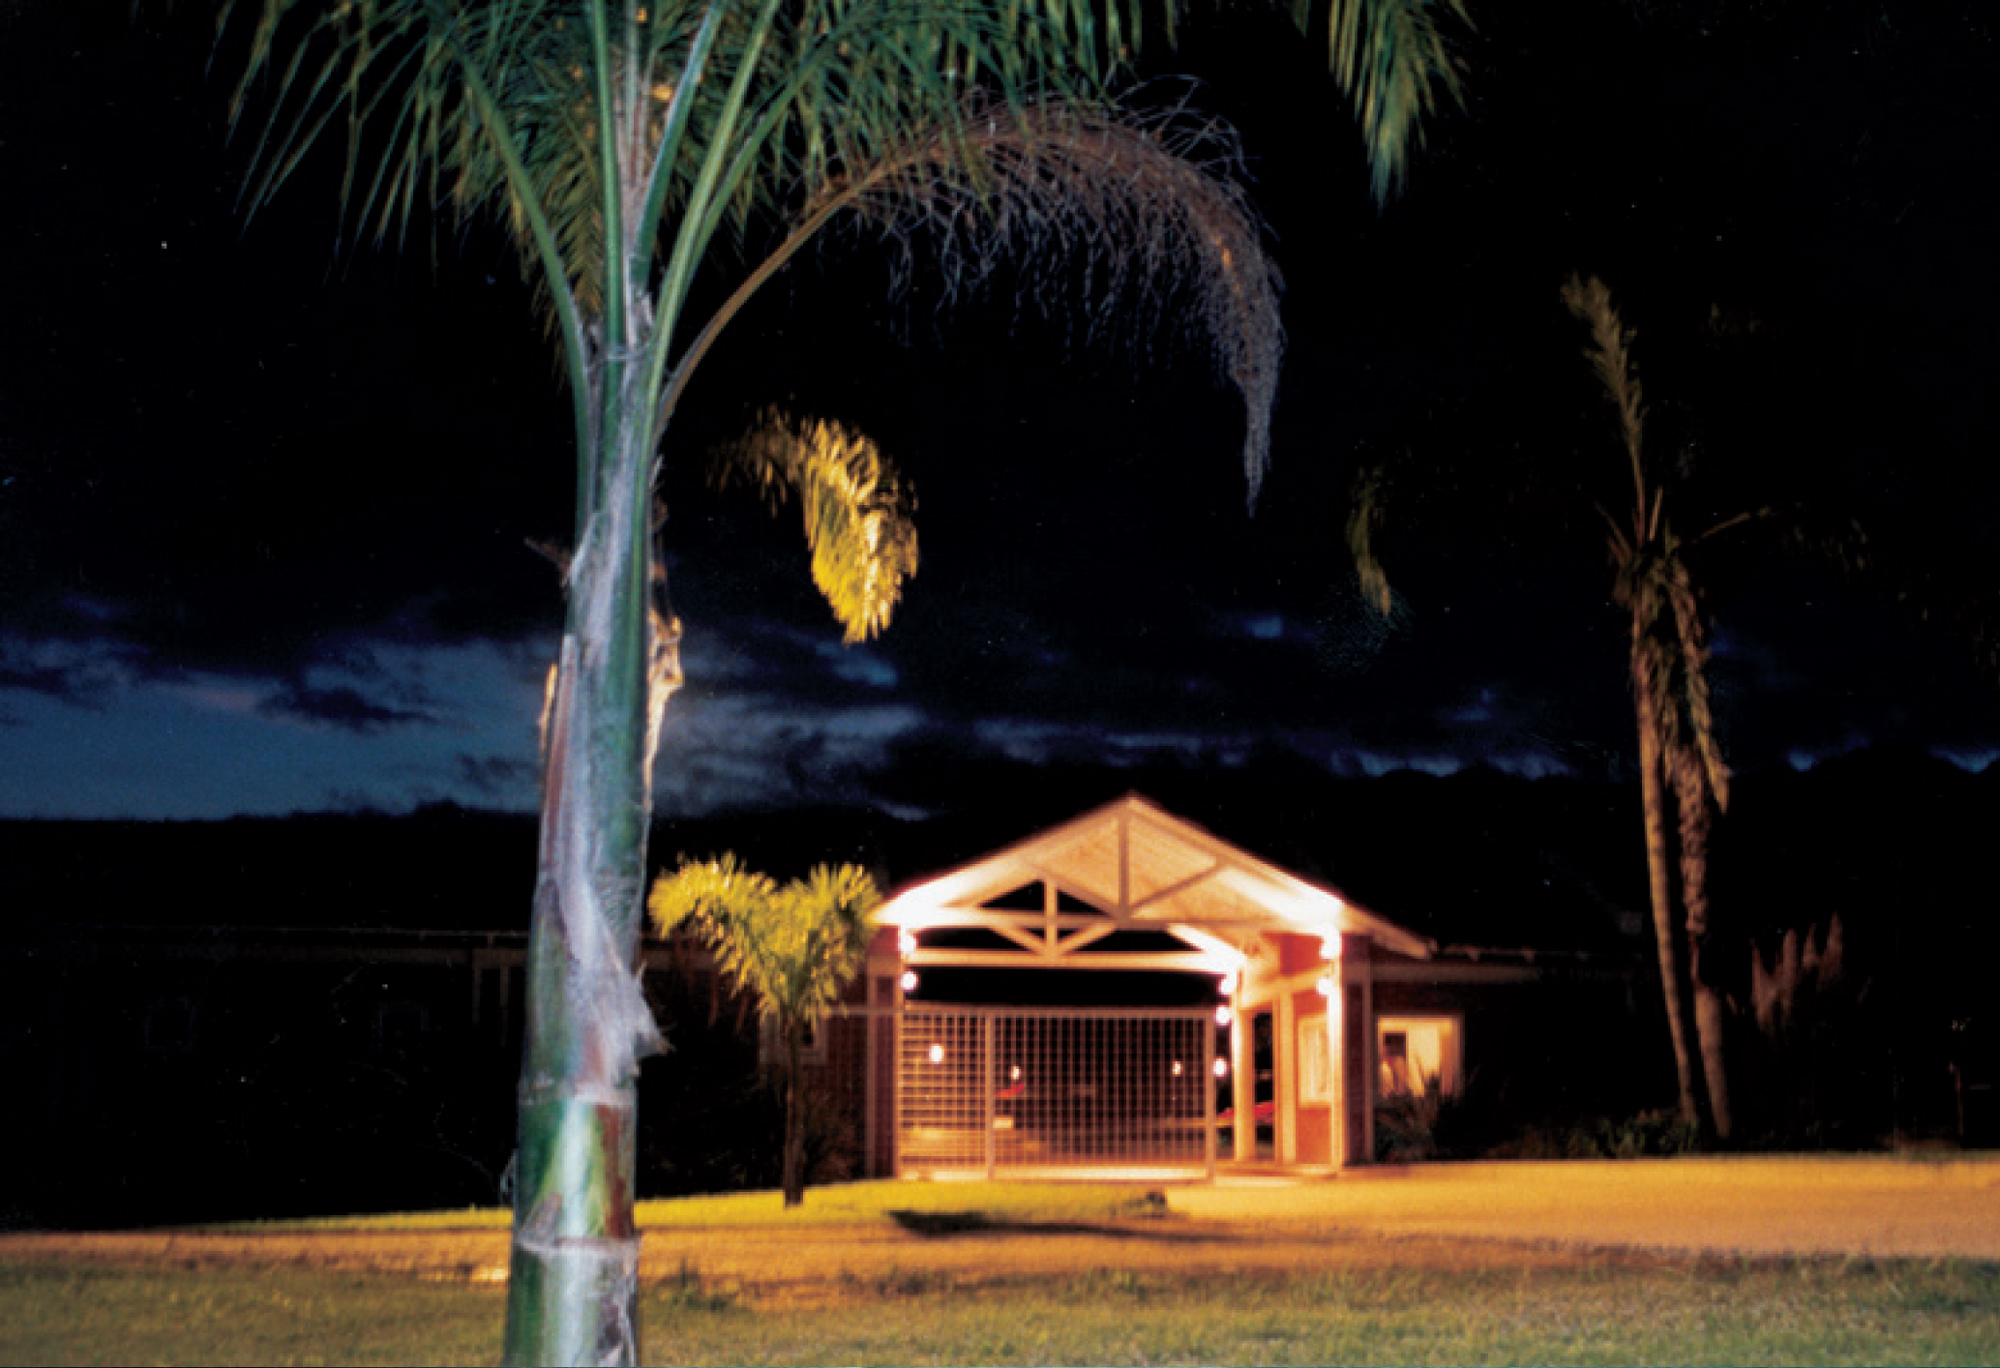 A photograph of the entrance of a “country” at night with lights on inside the structure.